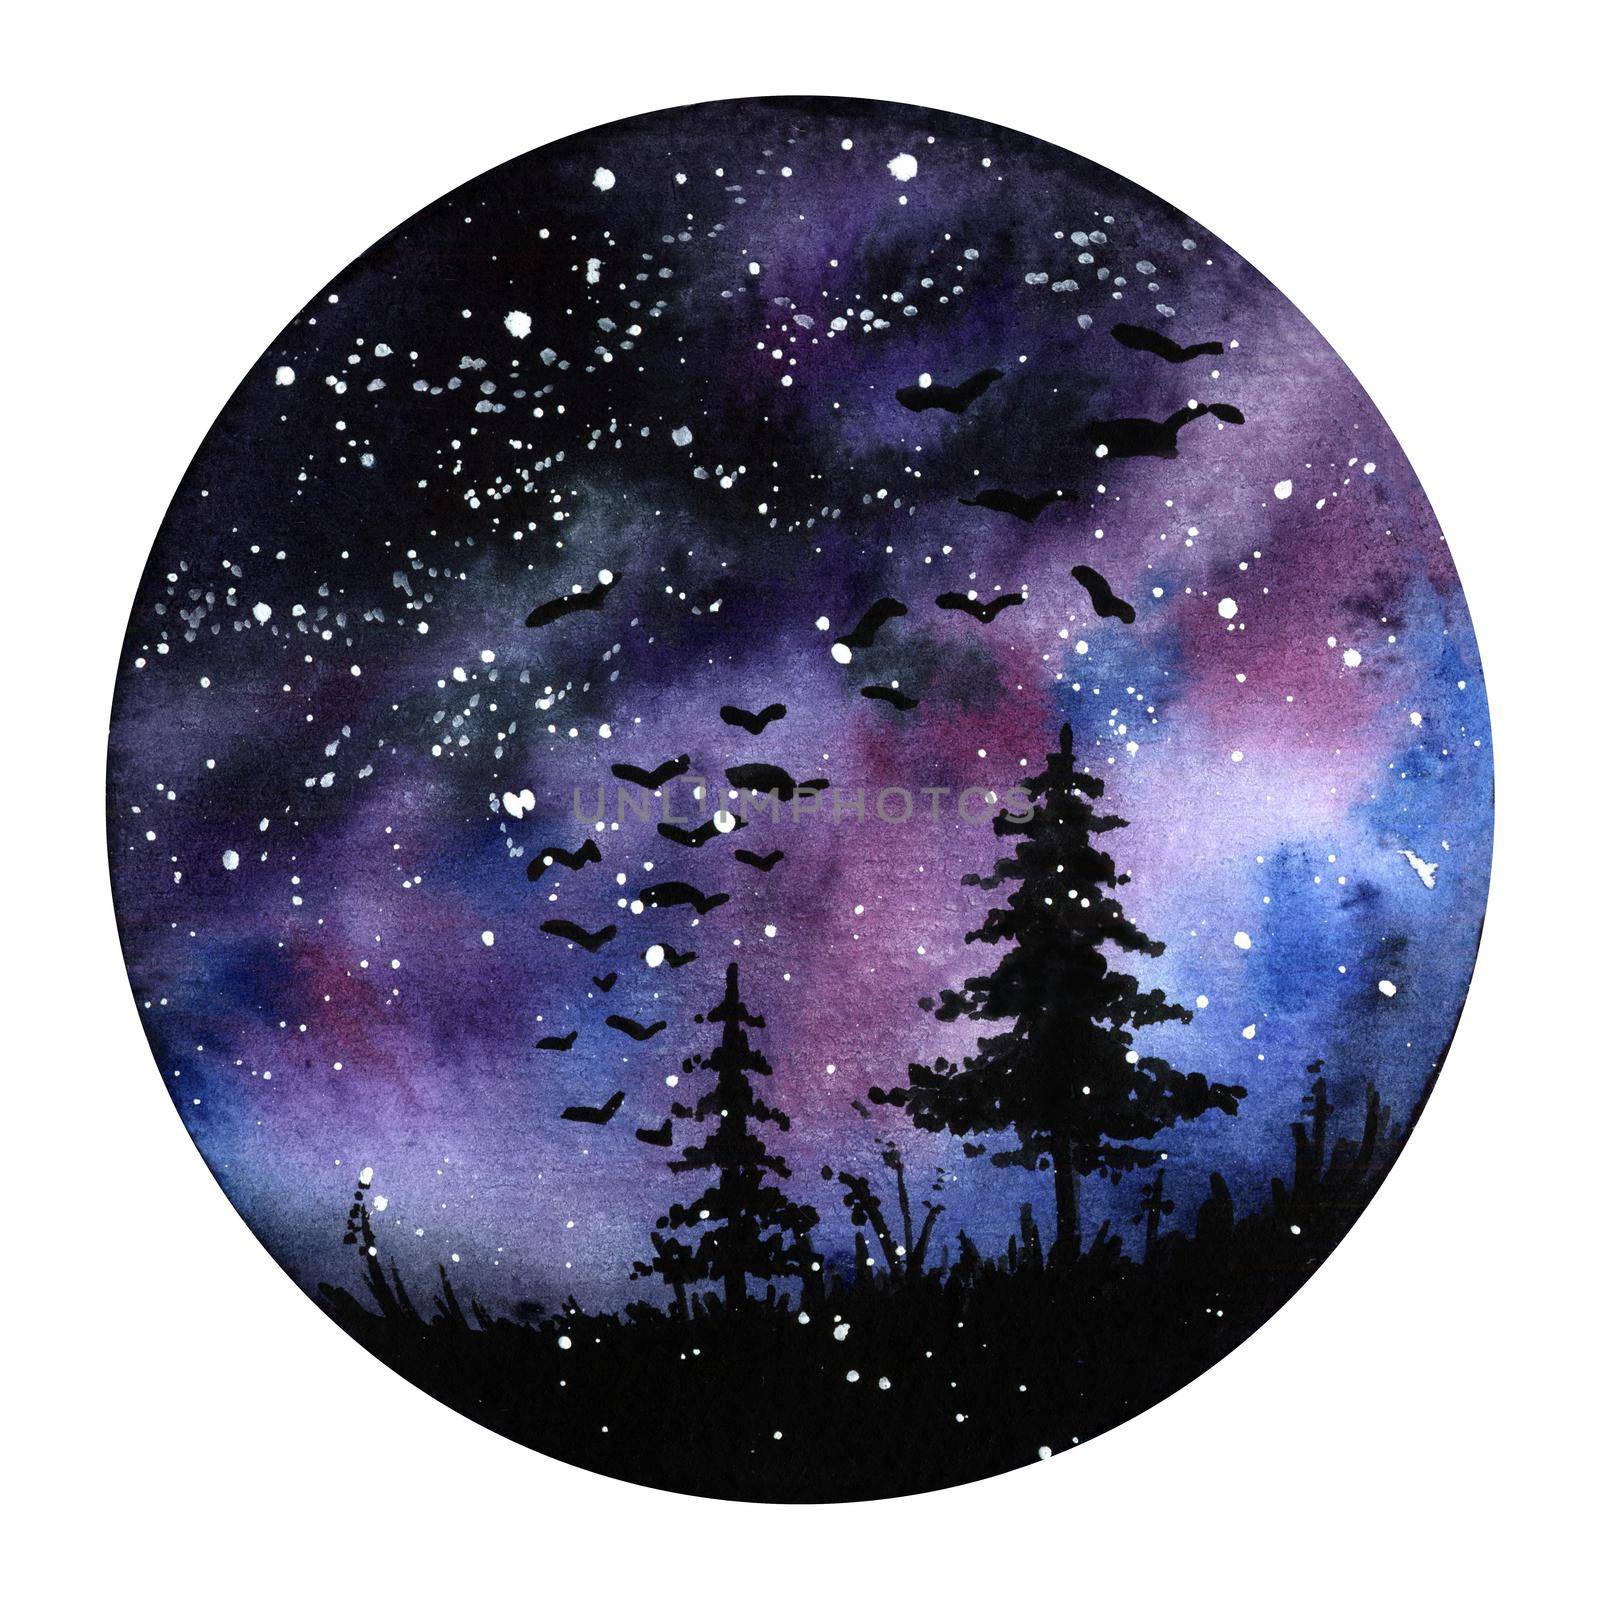 Watercolour painting Northern lights space landscape. Violet, black and blue colors. Modern new round illustration with galaxy trees. Art watercolor drawing background, artistic texture. Tree paint. by DesignAB